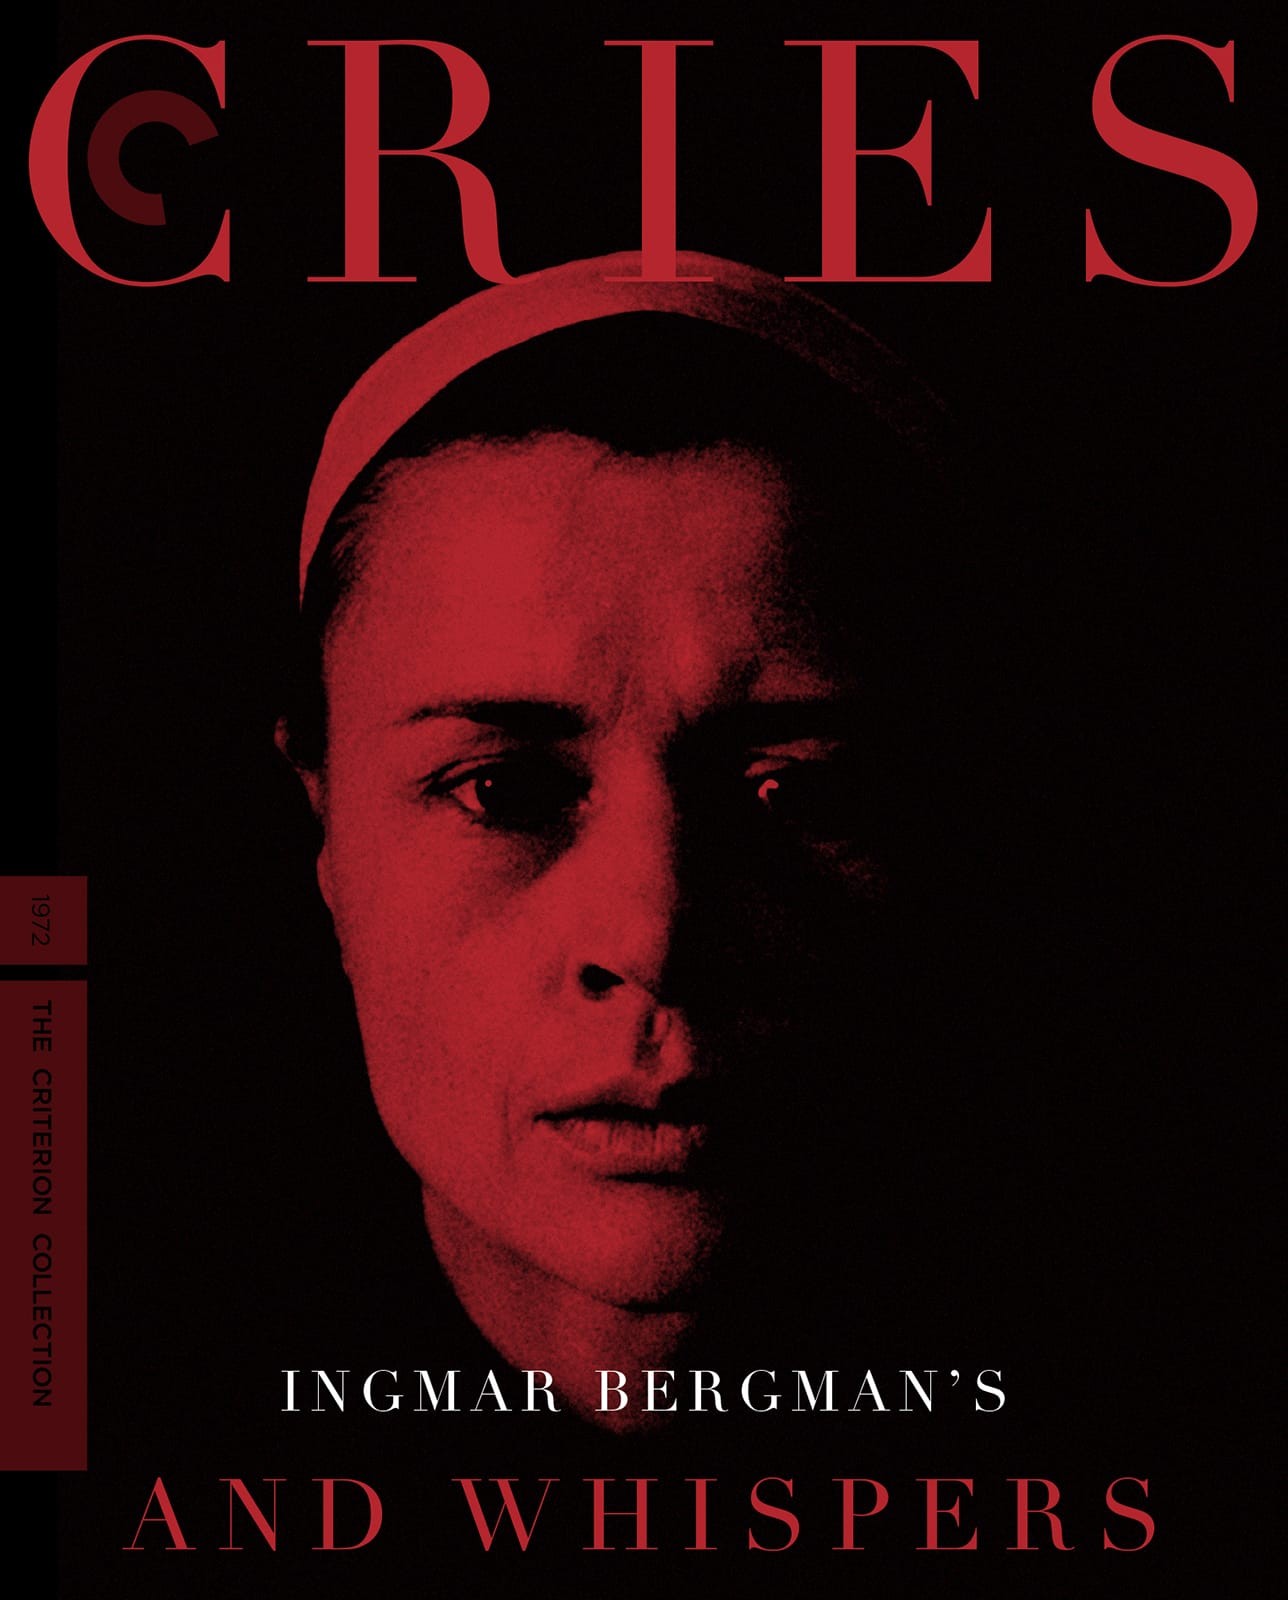 The Philosophy of Film: Bergman’s 1973 Cries and Whispers